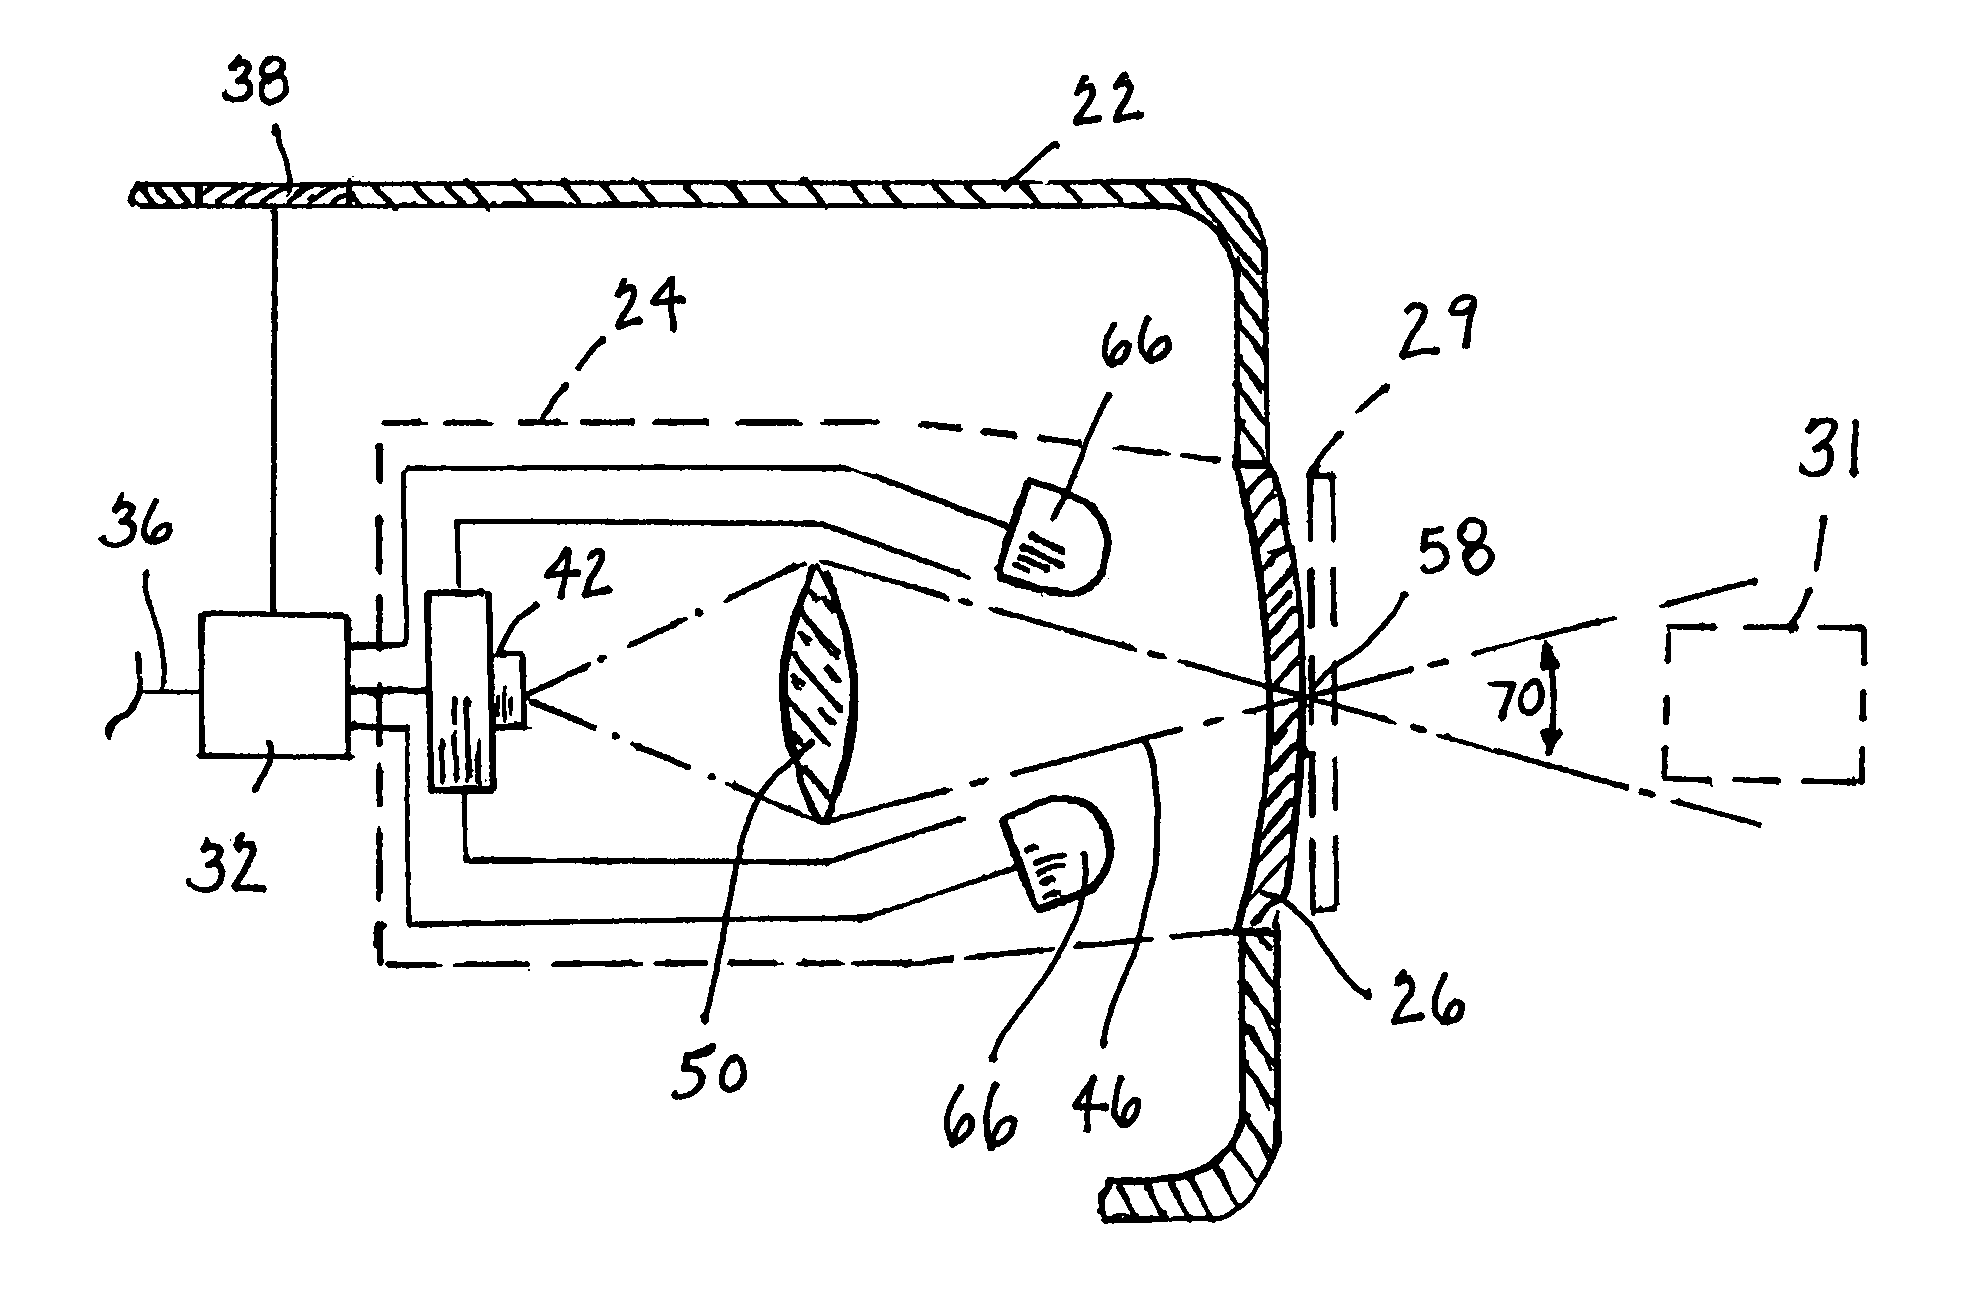 Medical device having a combination data reader and infrared data transceiver and method of using same